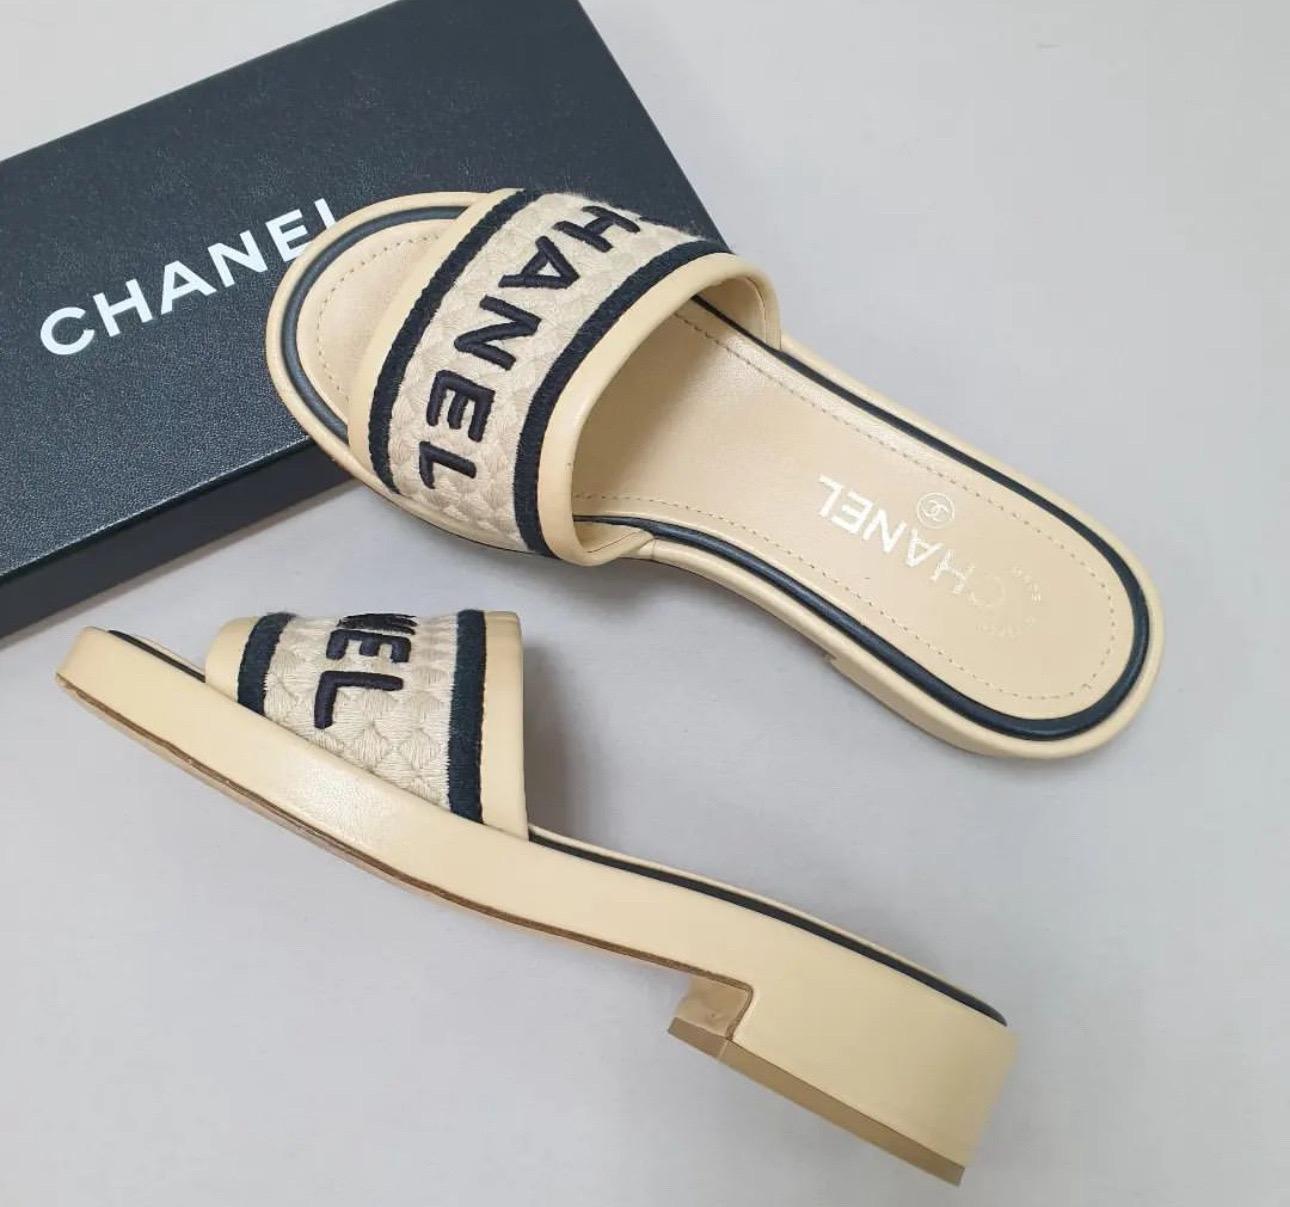     Chanel Leather Slides
    From the 2021 Collection by Virginie Viard
    White
    Interlocking CC Logo
    Embroidered Accent



Very good condition.
Signs of wear seen on pics.
Sz. 37
No box. No dust bag